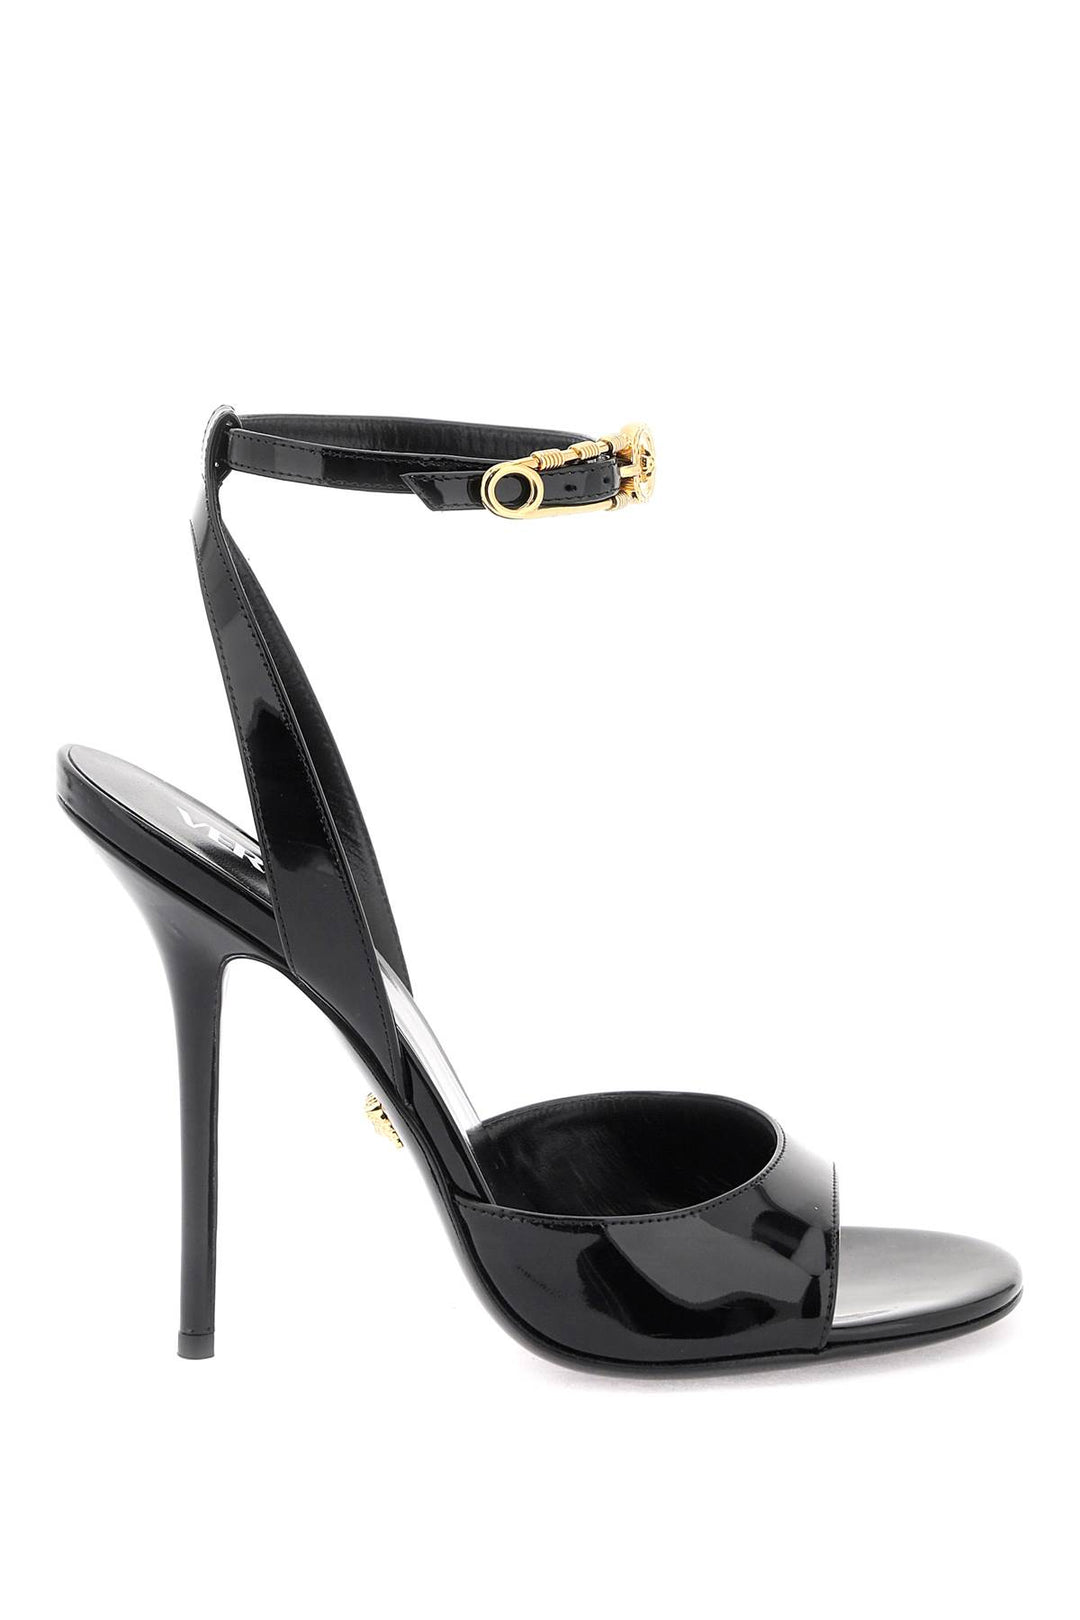 Versace 'Safety Pin' Patent Leather Sandals   Nero